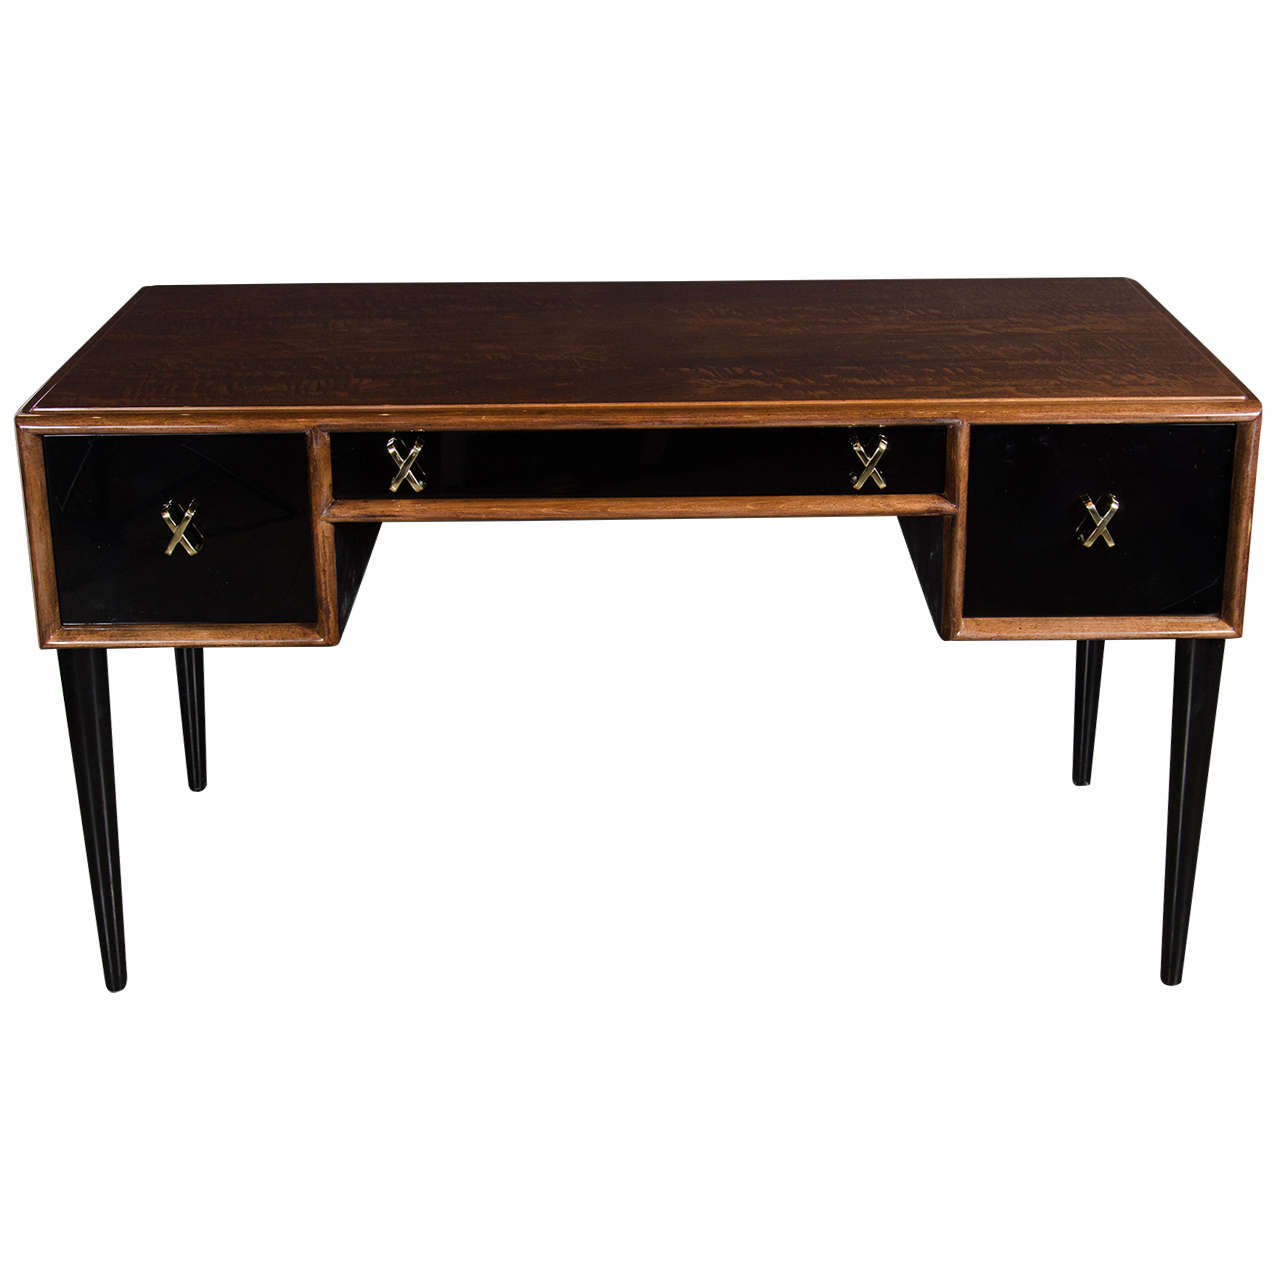 Mid-Century Modernist Desk or Vanity by Paul Frankl in Book-Matched Walnut